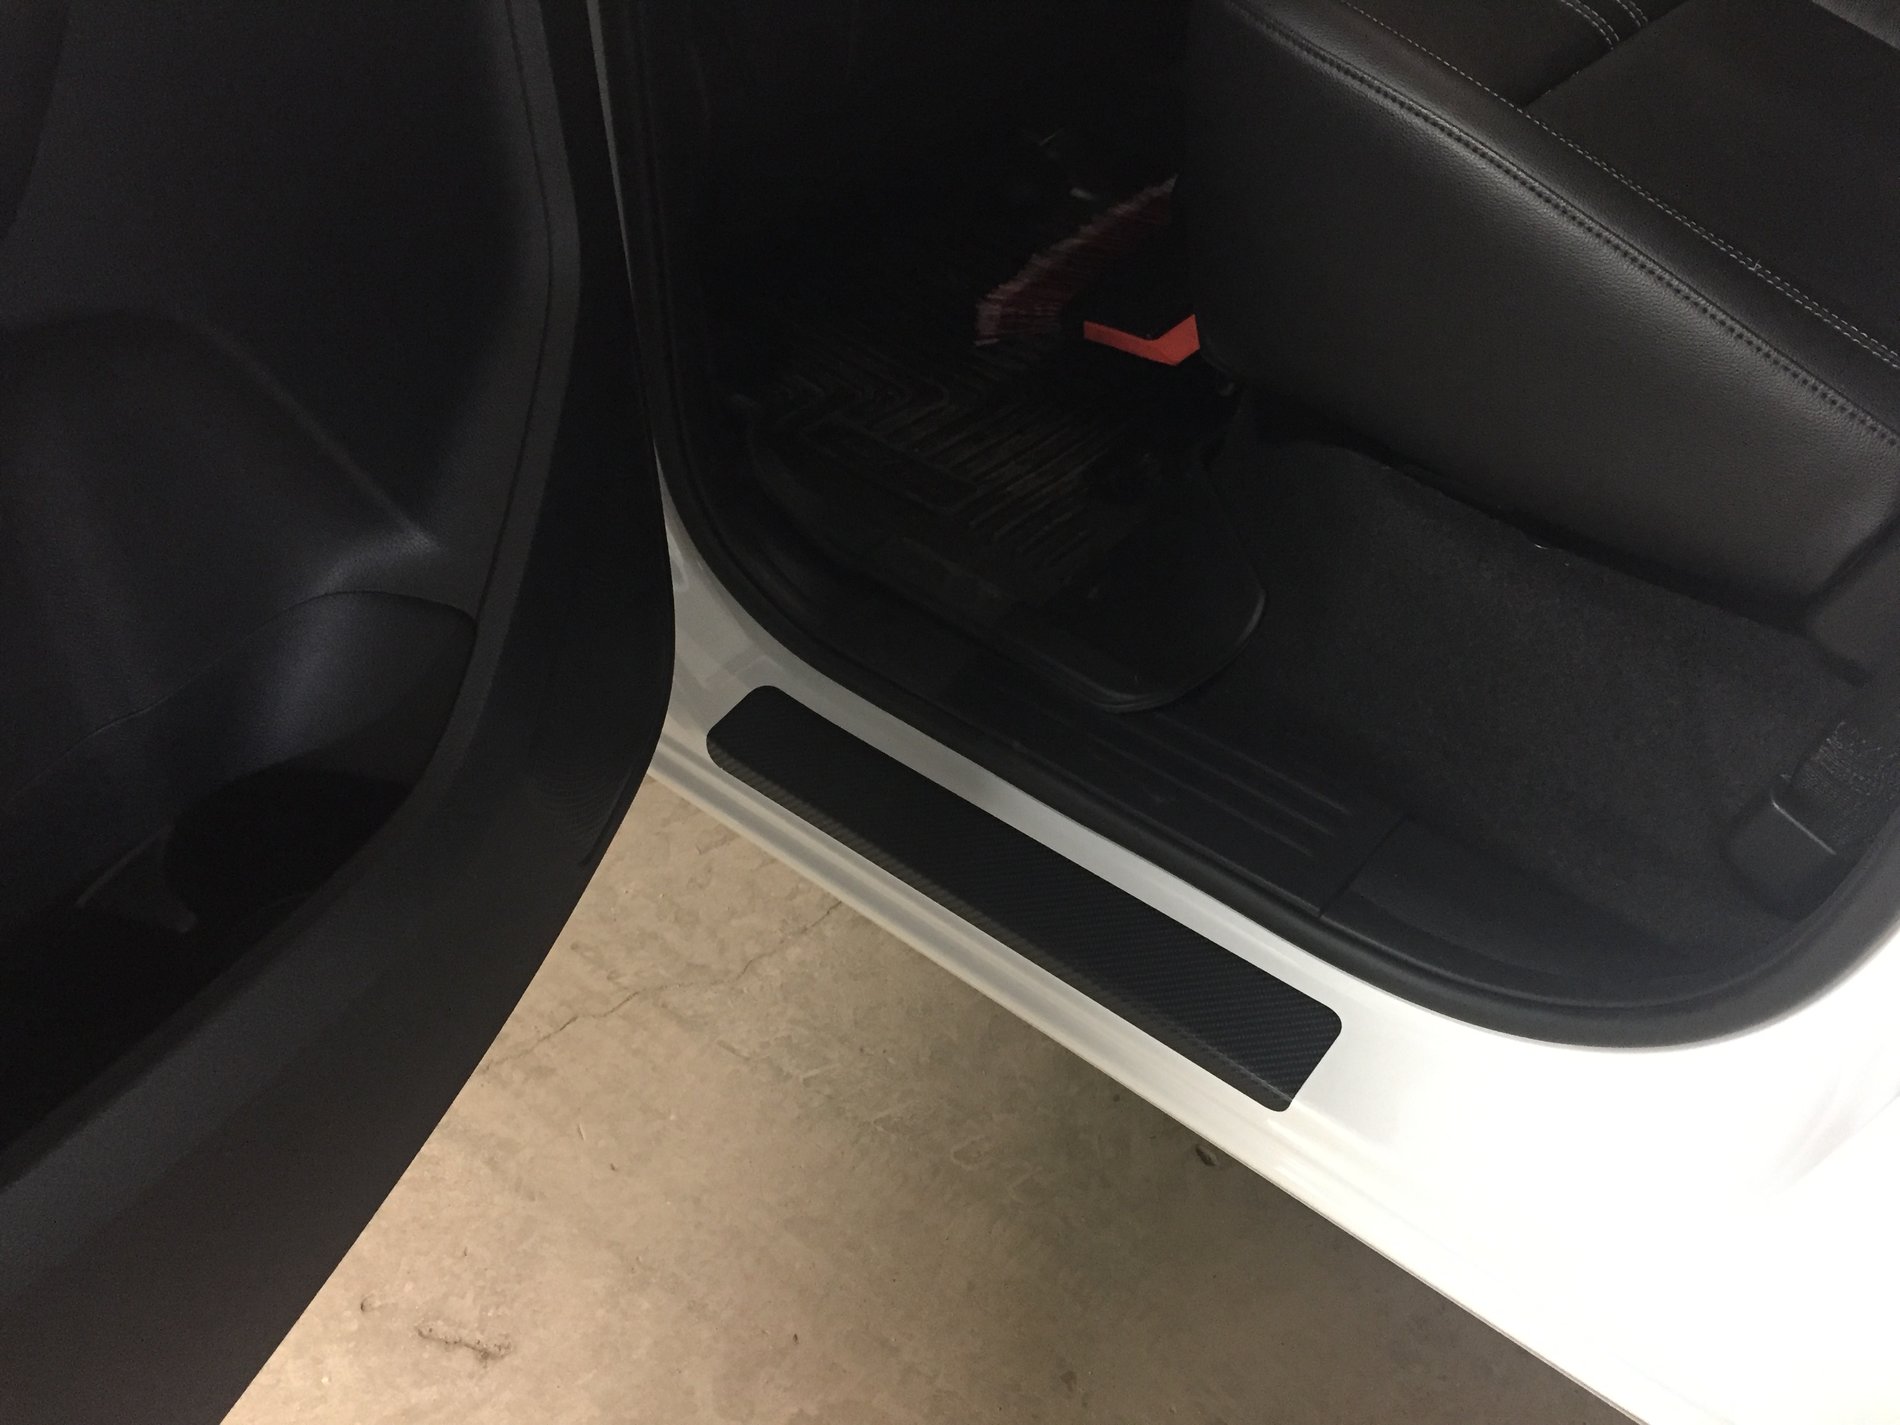 Cheap eBay door sill protectors | 2019+ Ford Ranger and Raptor Forum